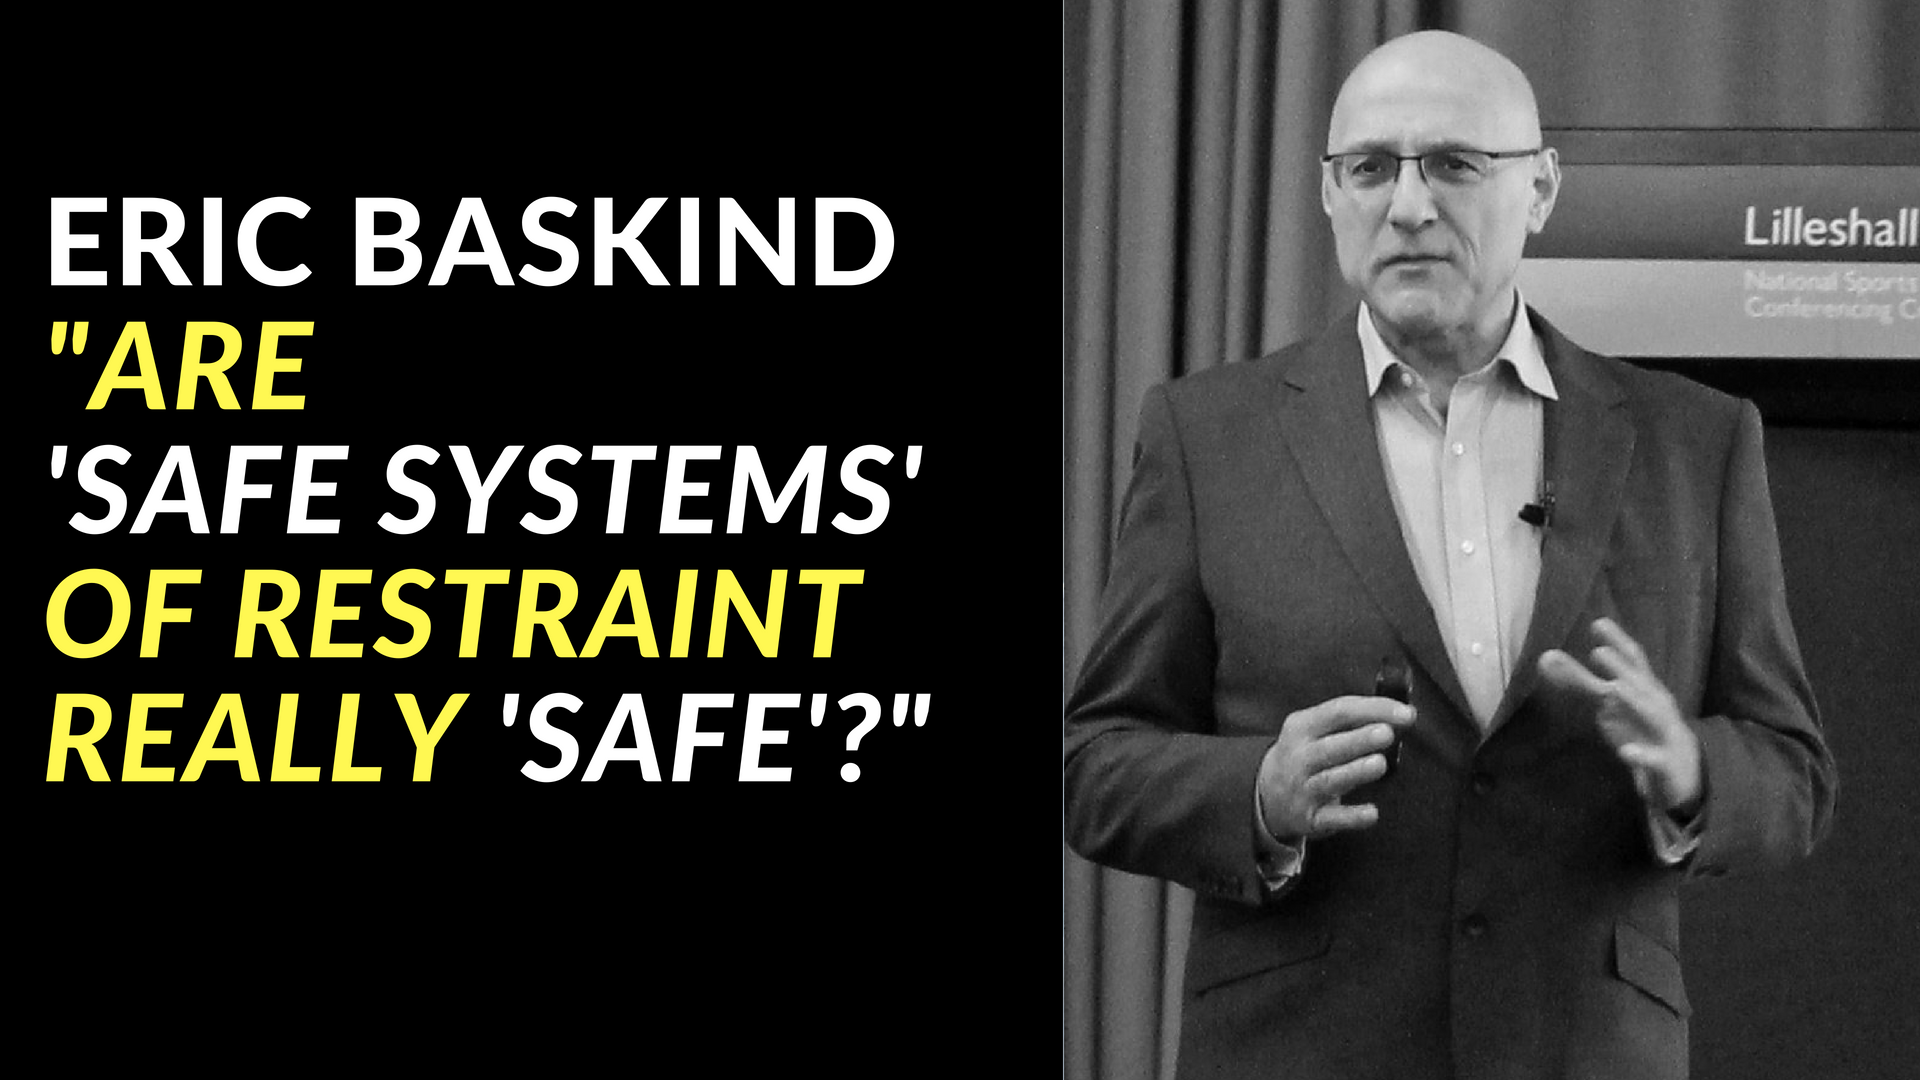 ERIC BASKIND - ARE 'SAFE SYSTEMS' OF RESTRAINT REALLY 'SAFE'